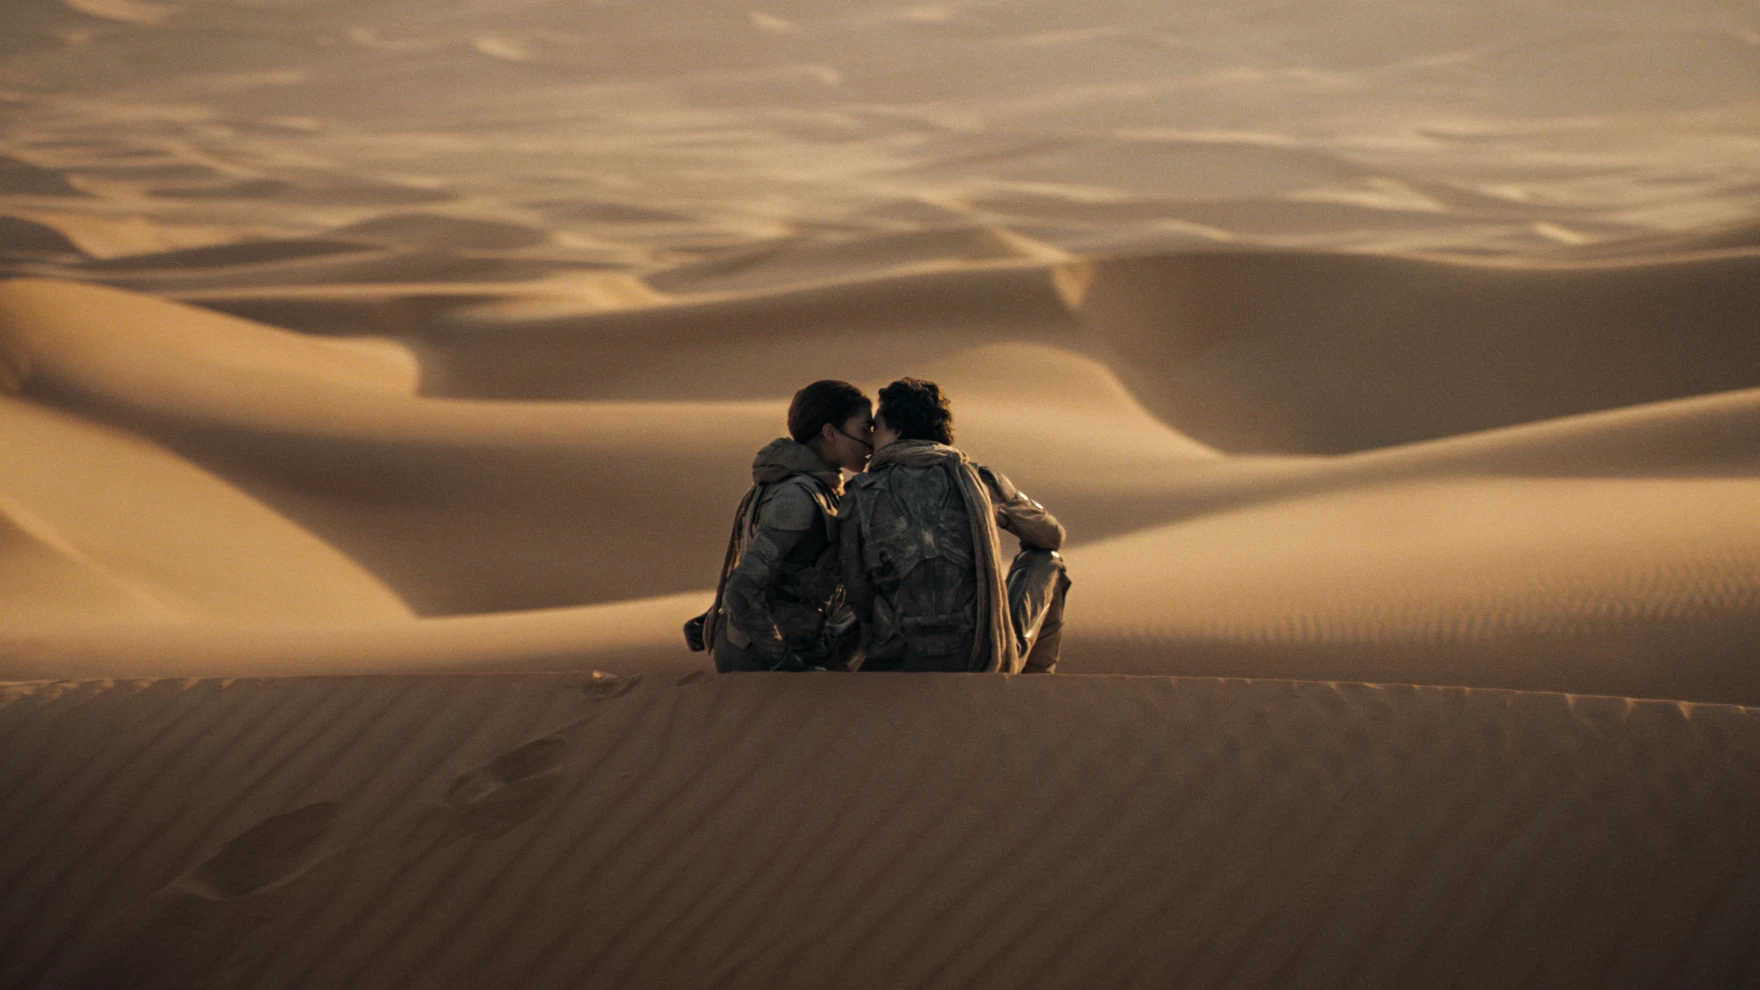 Paul Atreides (Timothee Chalamet) and Chani (Zendaya) share an intimate moment on the dunes of Arrakis (Photo courtesy of Warner Bros. Pictures).